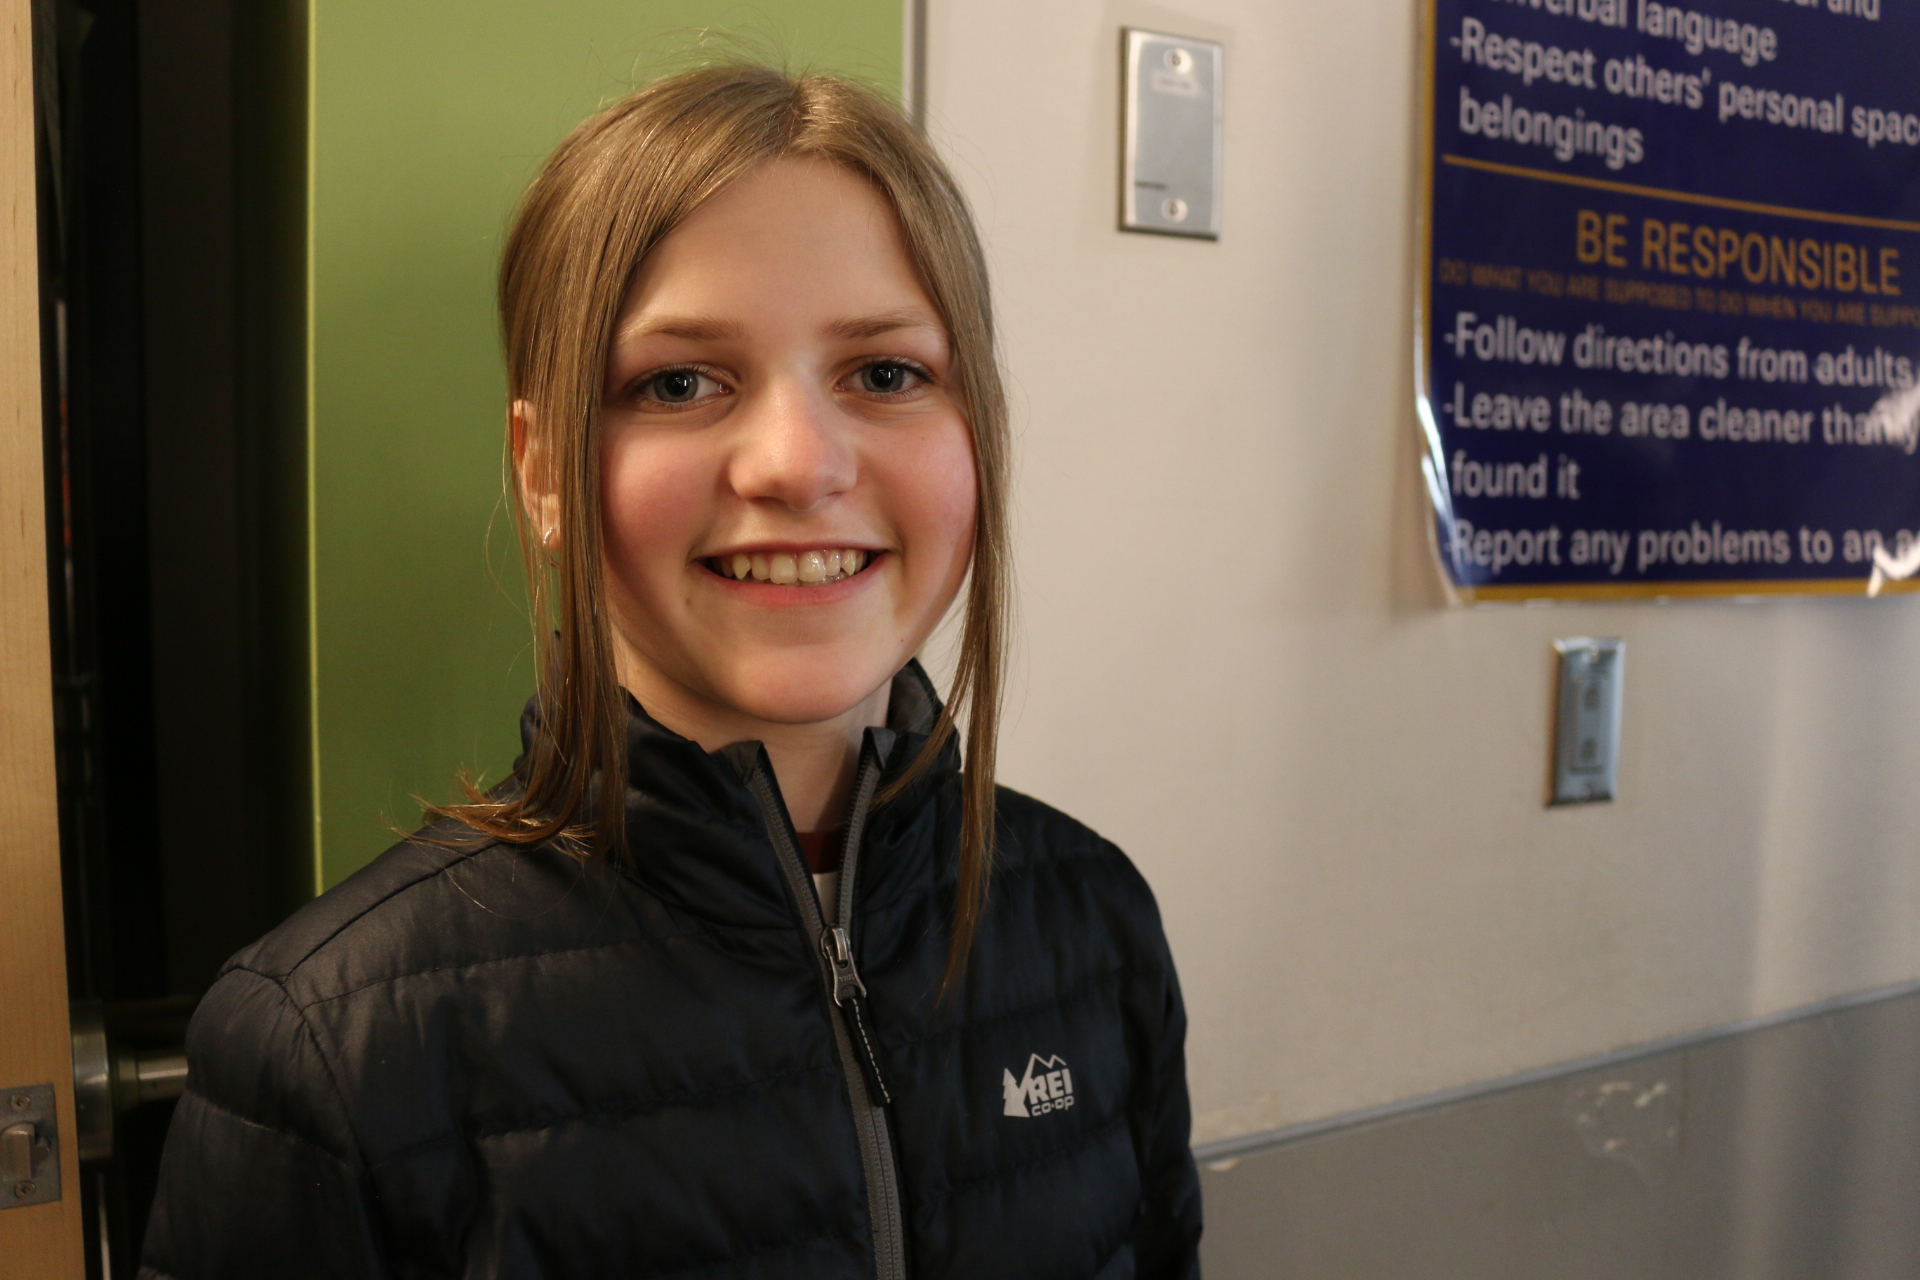 Smiling student in a hallway at the school